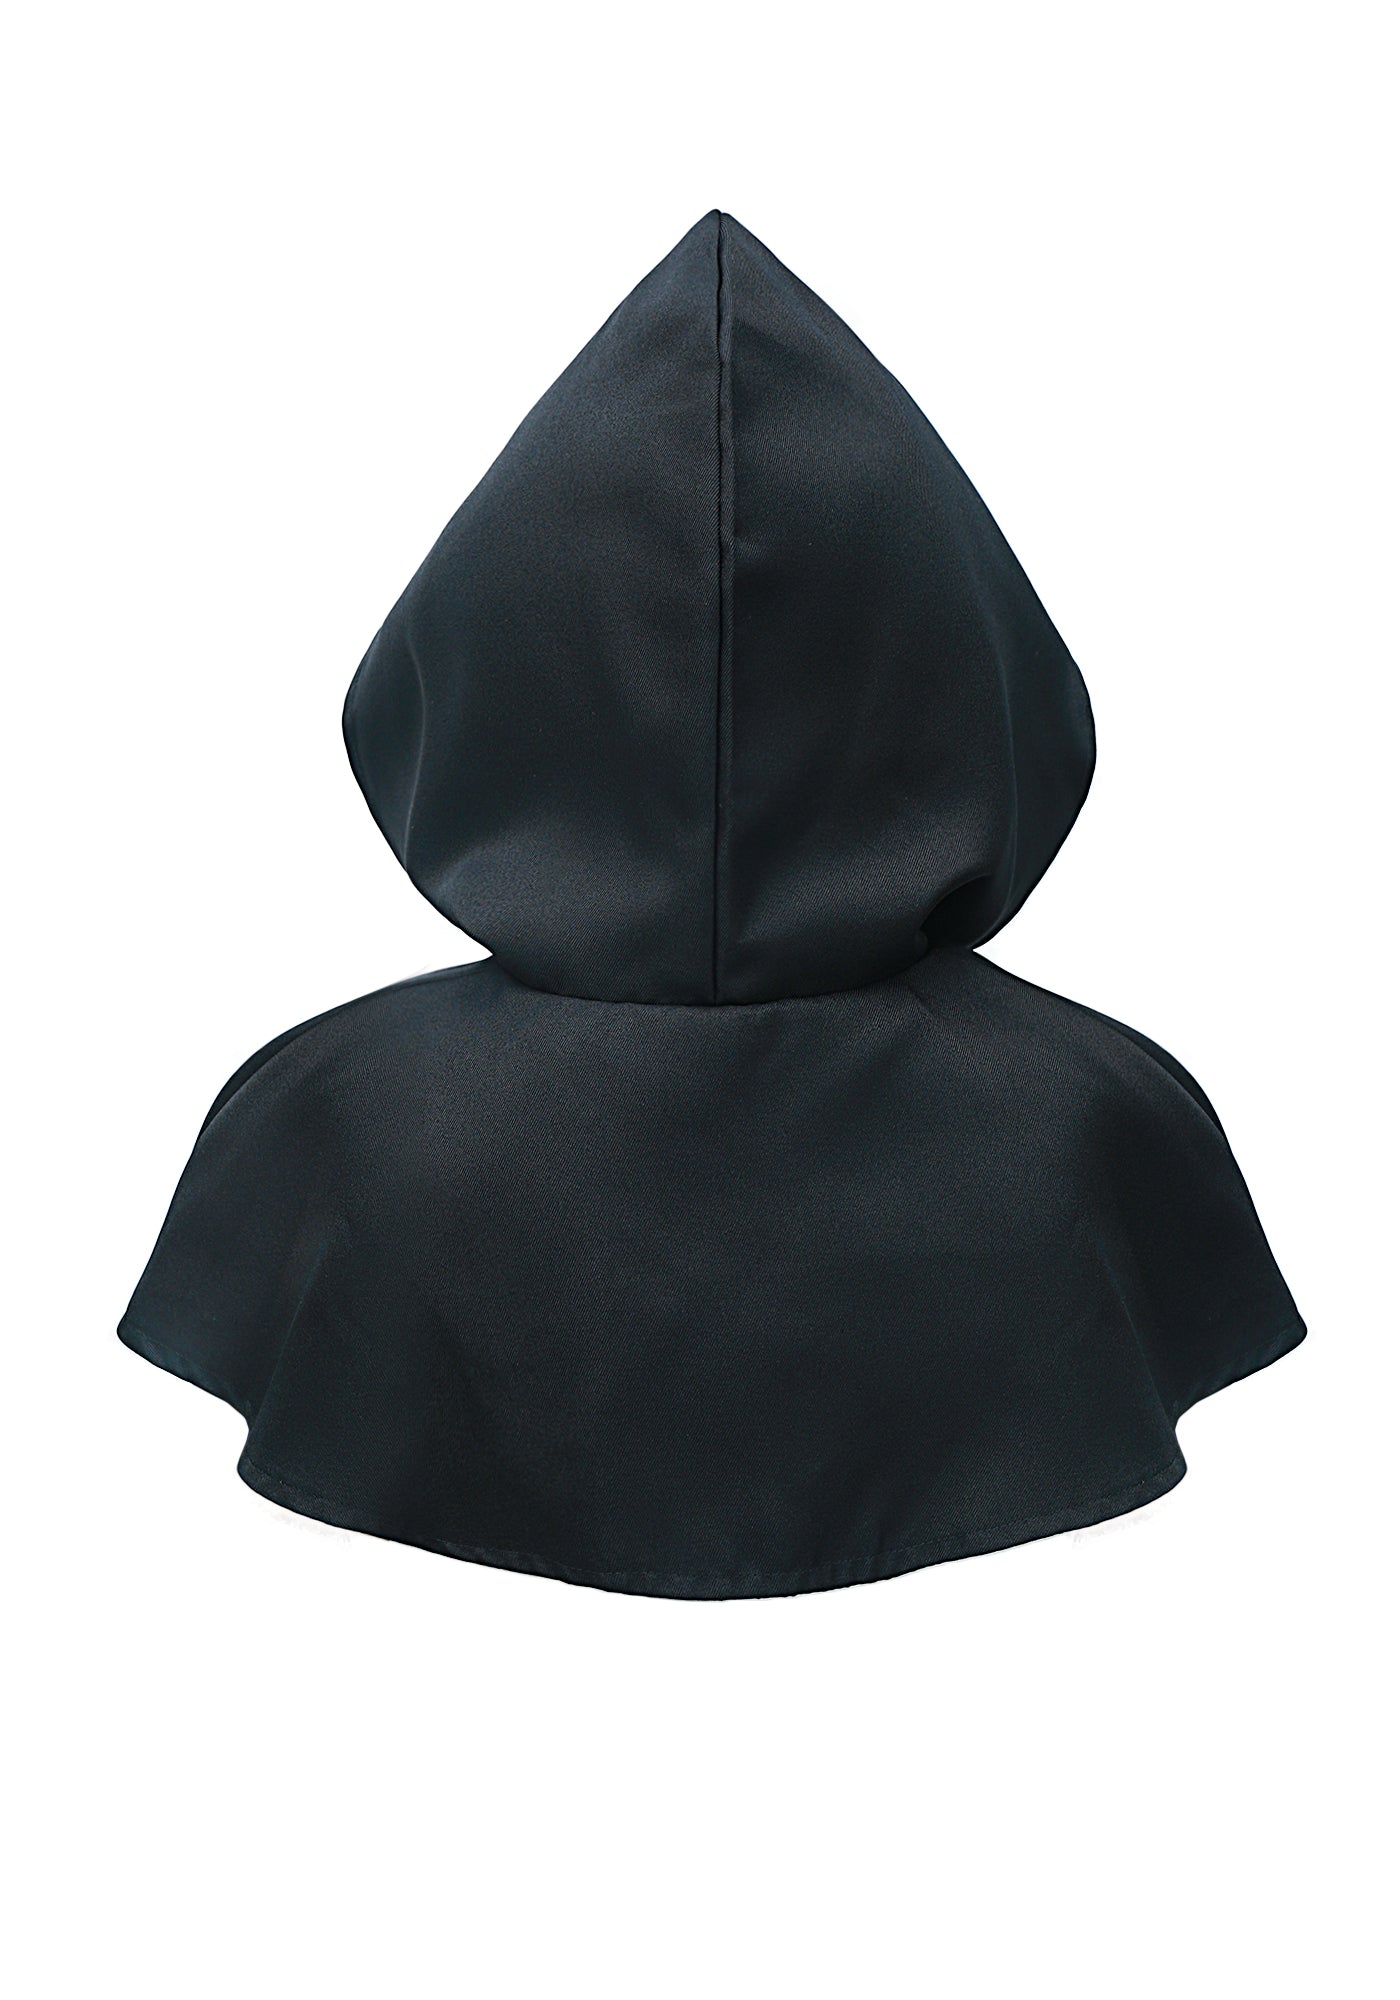 DAZCOS Luz Noceda Cosplay Vintage Gothic Cowl Hat Anime Cosplay Halloween Hooded Wicca Pagan Cosplay Accessory